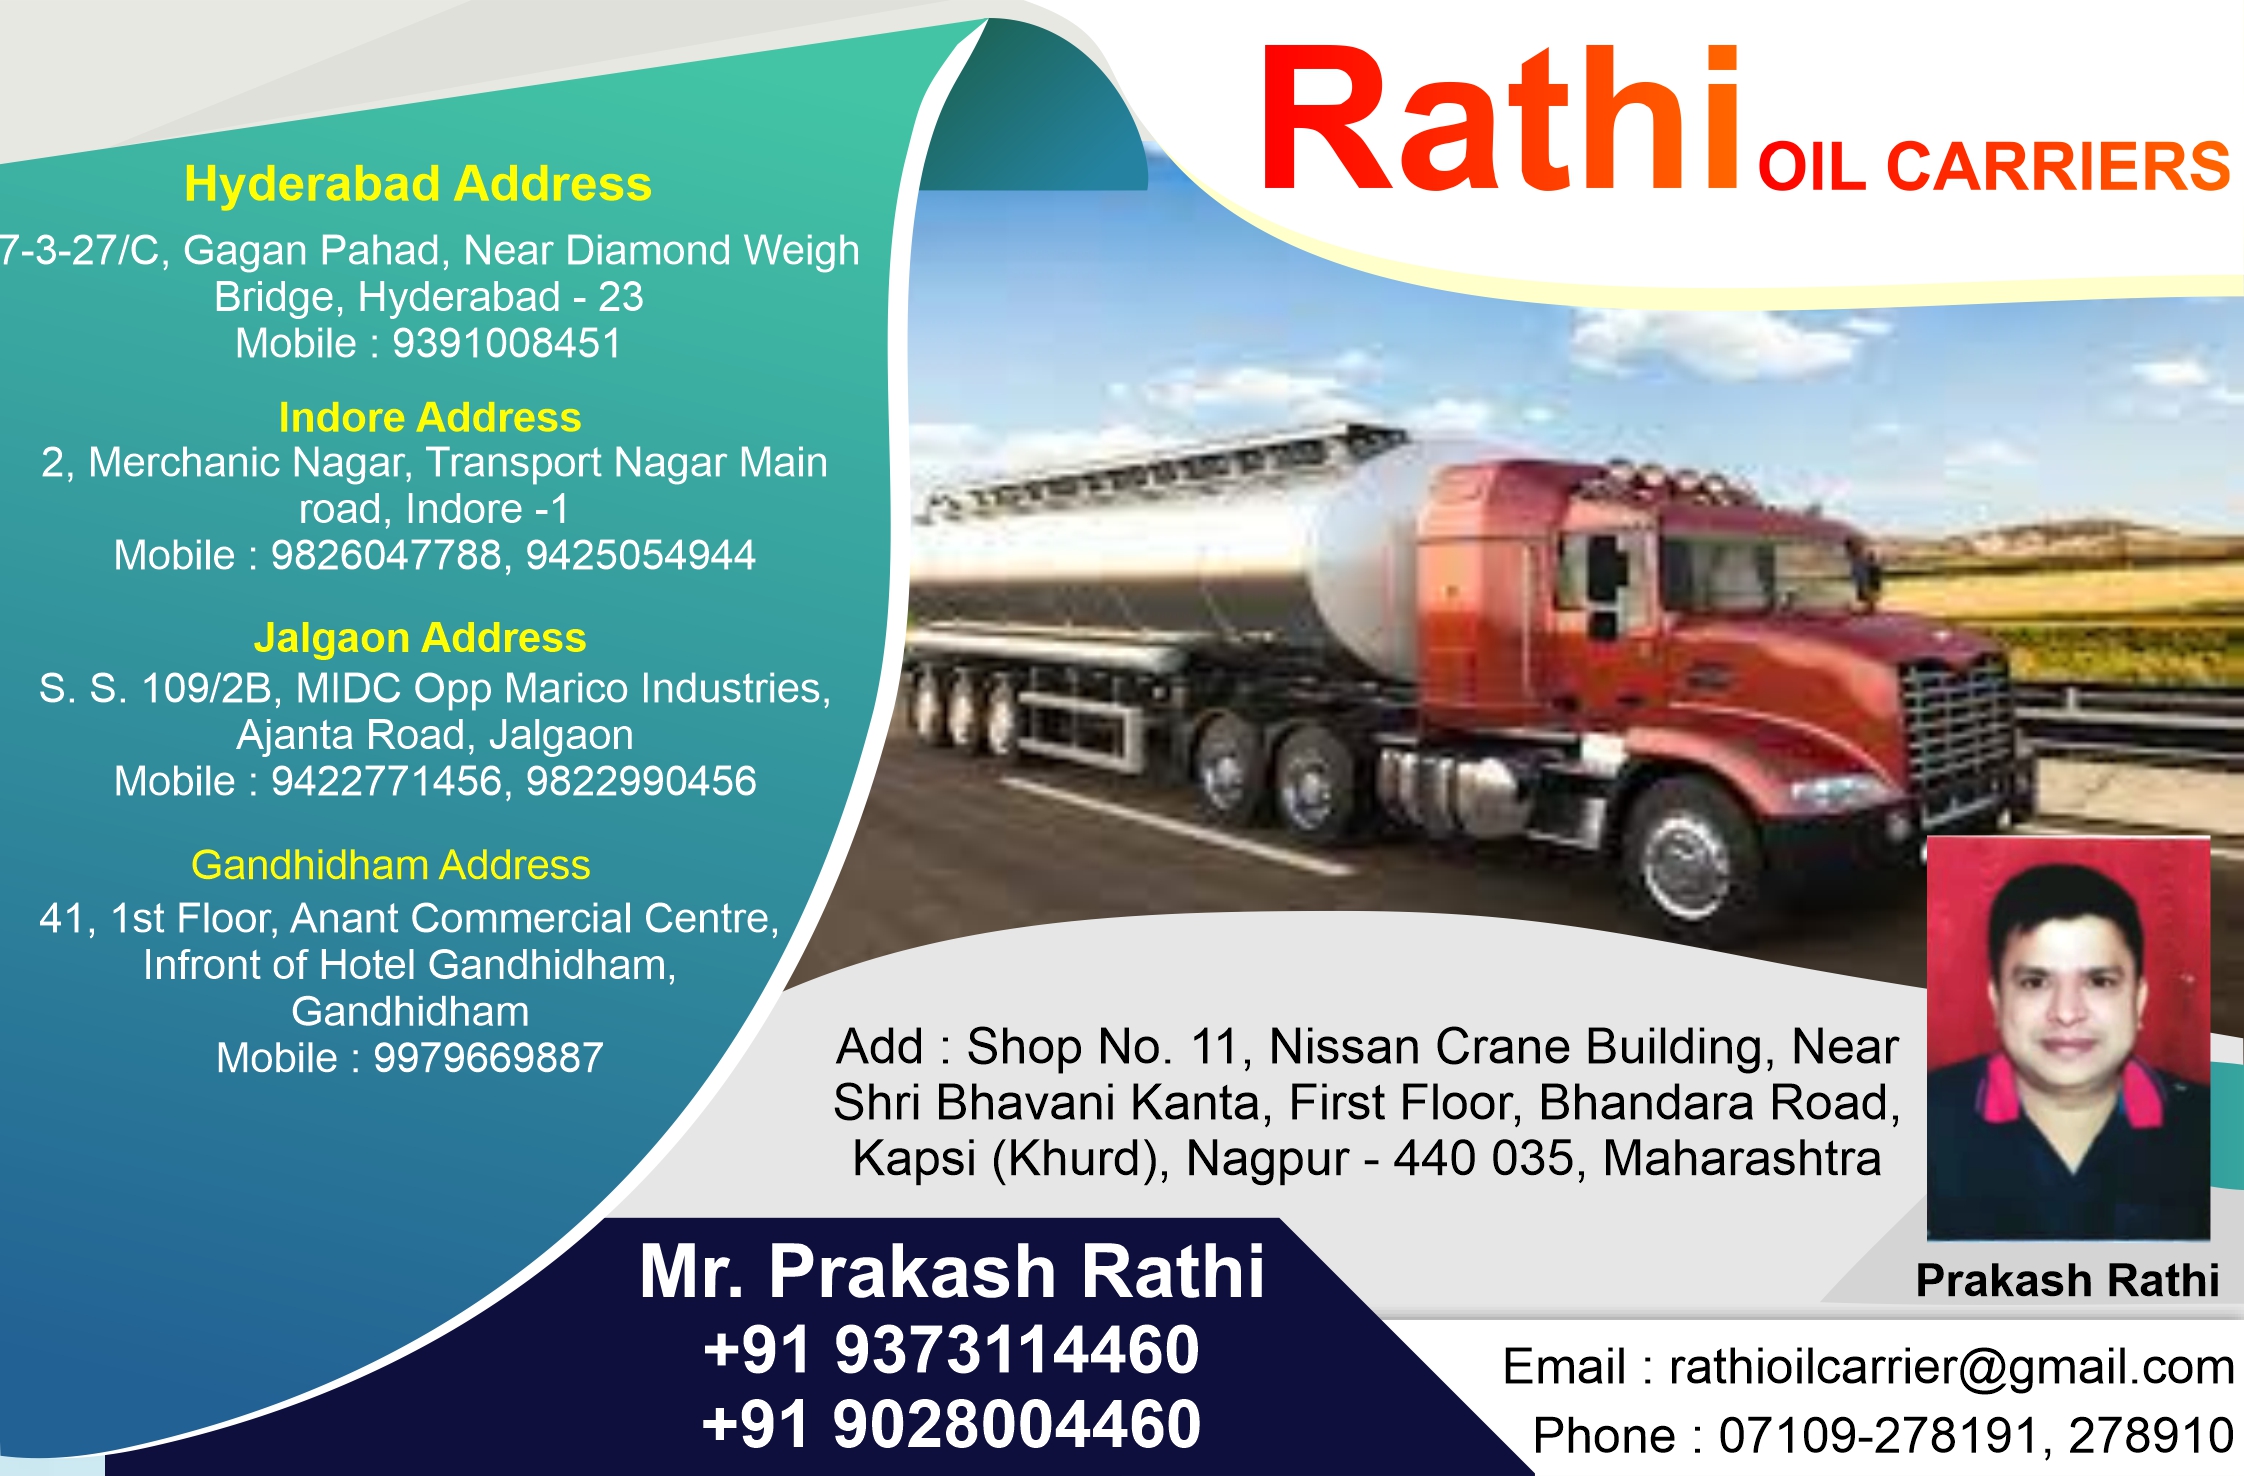 Rathi Oil Carriers